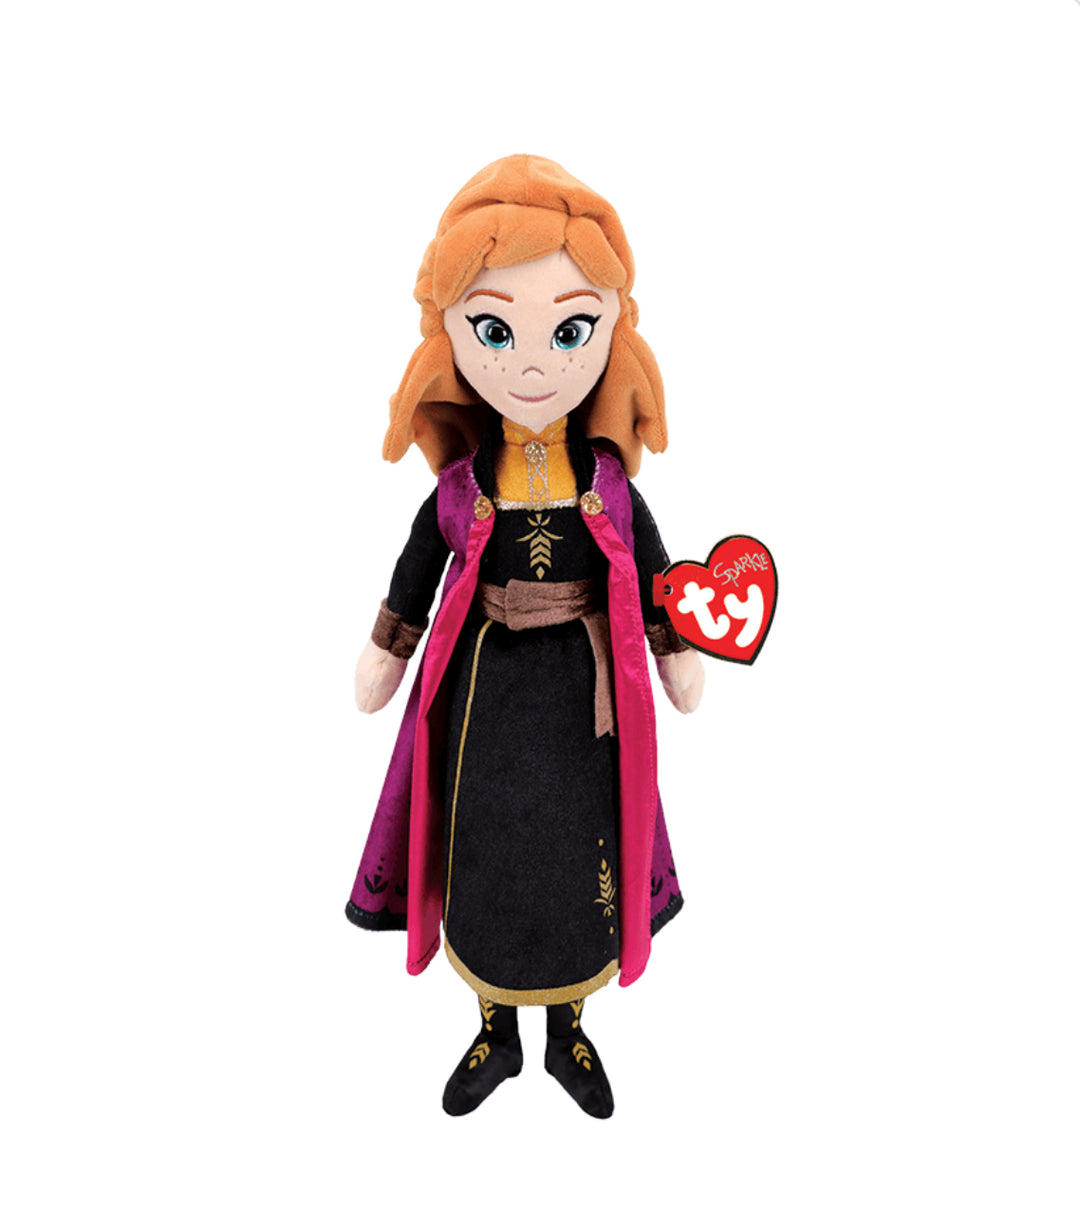 TY Disney Princess Stuffed Animal, Anna-240 Kids-Inspired by Justeen-Women's Clothing Boutique in Chicago, Illinois